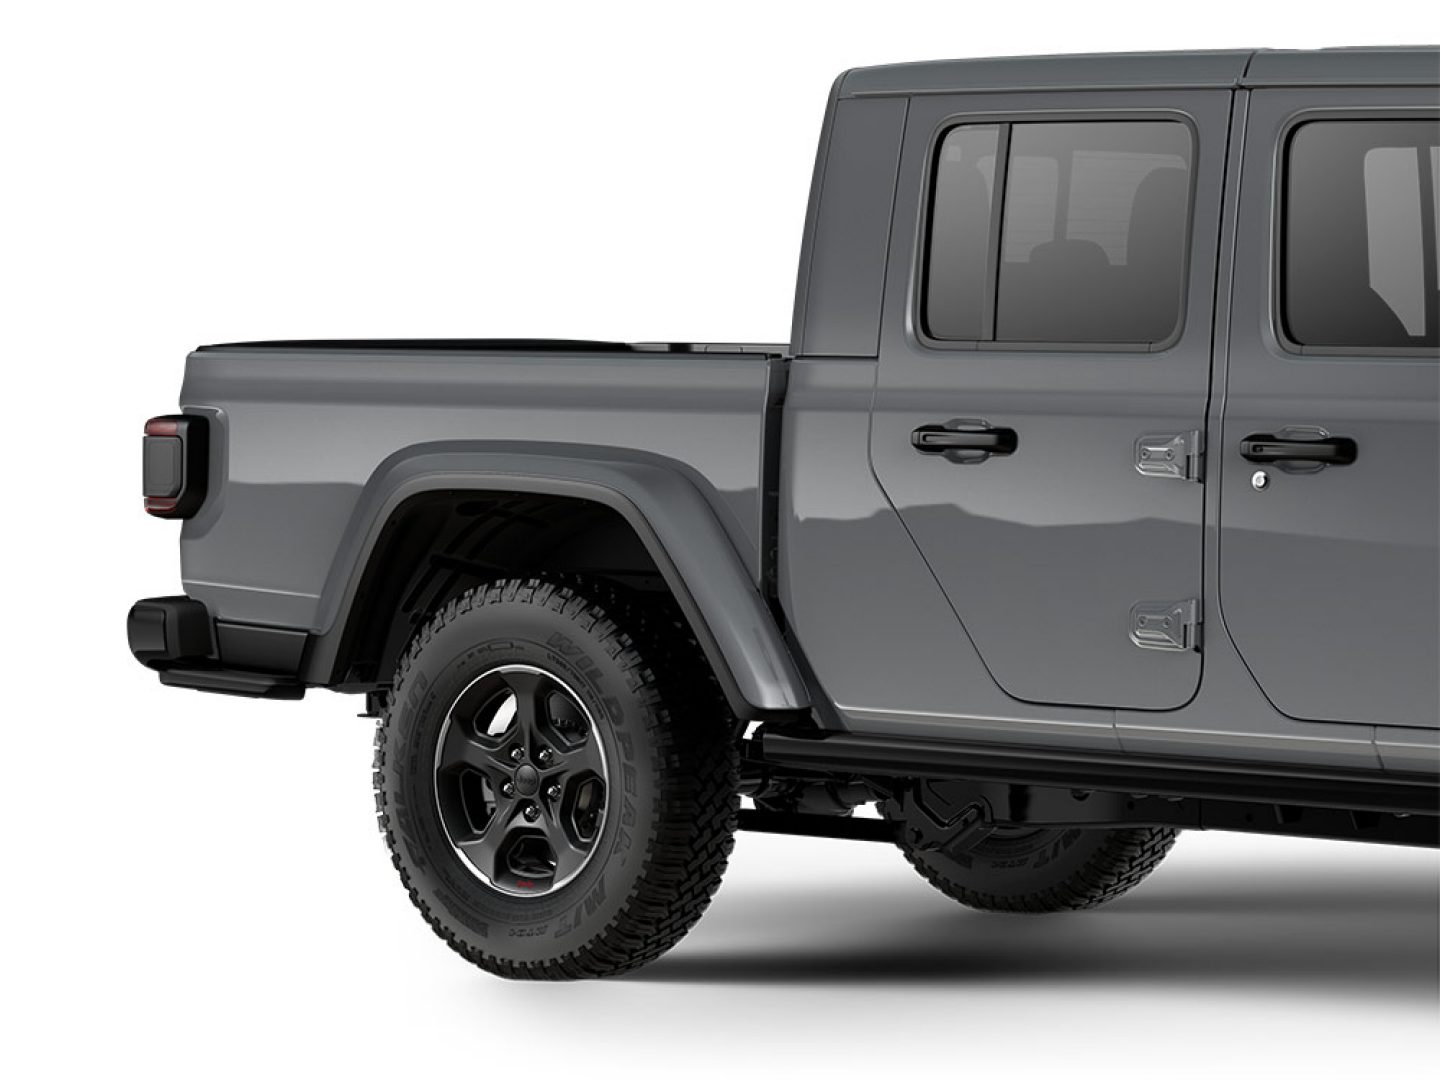 Jeep Gladiator rear section with 17 Inch Gloss Black Wheel with Polished Edge